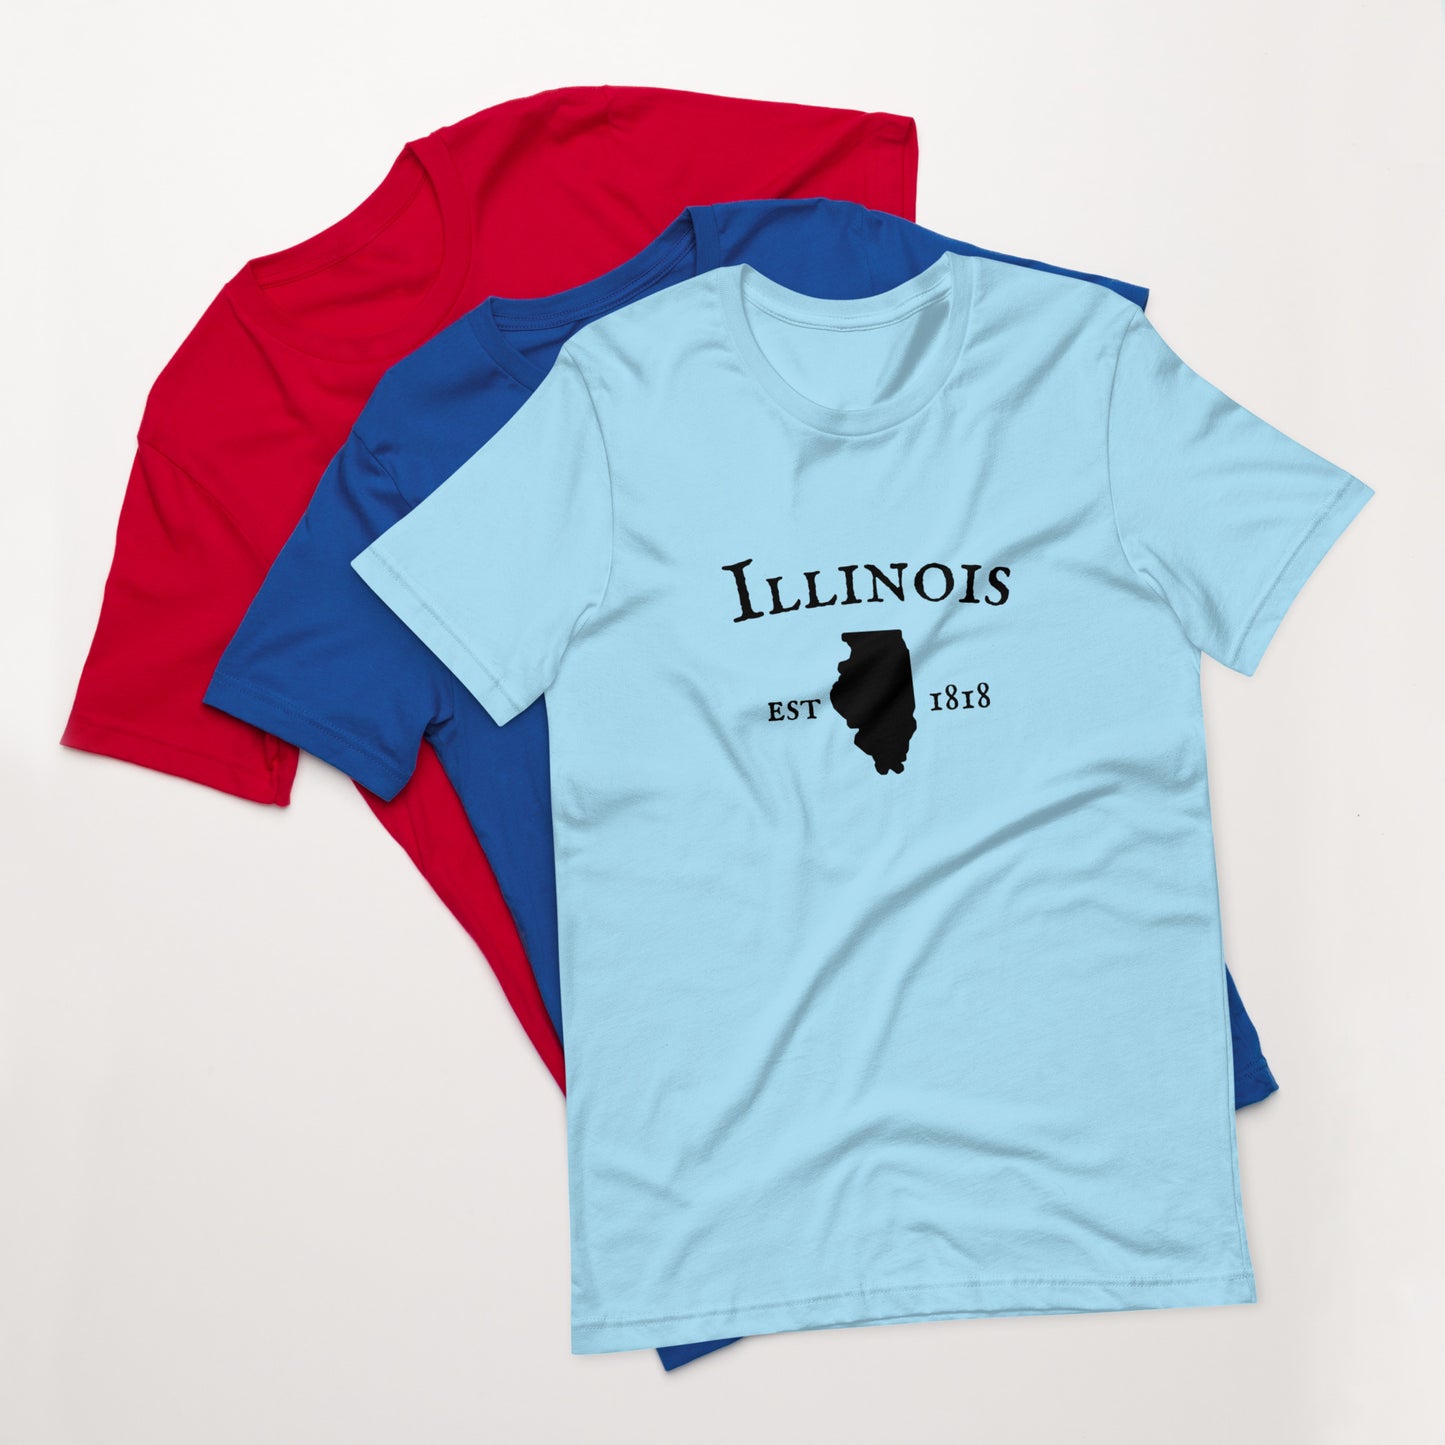 "Illinois Established In 1818" T-Shirt - Weave Got Gifts - Unique Gifts You Won’t Find Anywhere Else!